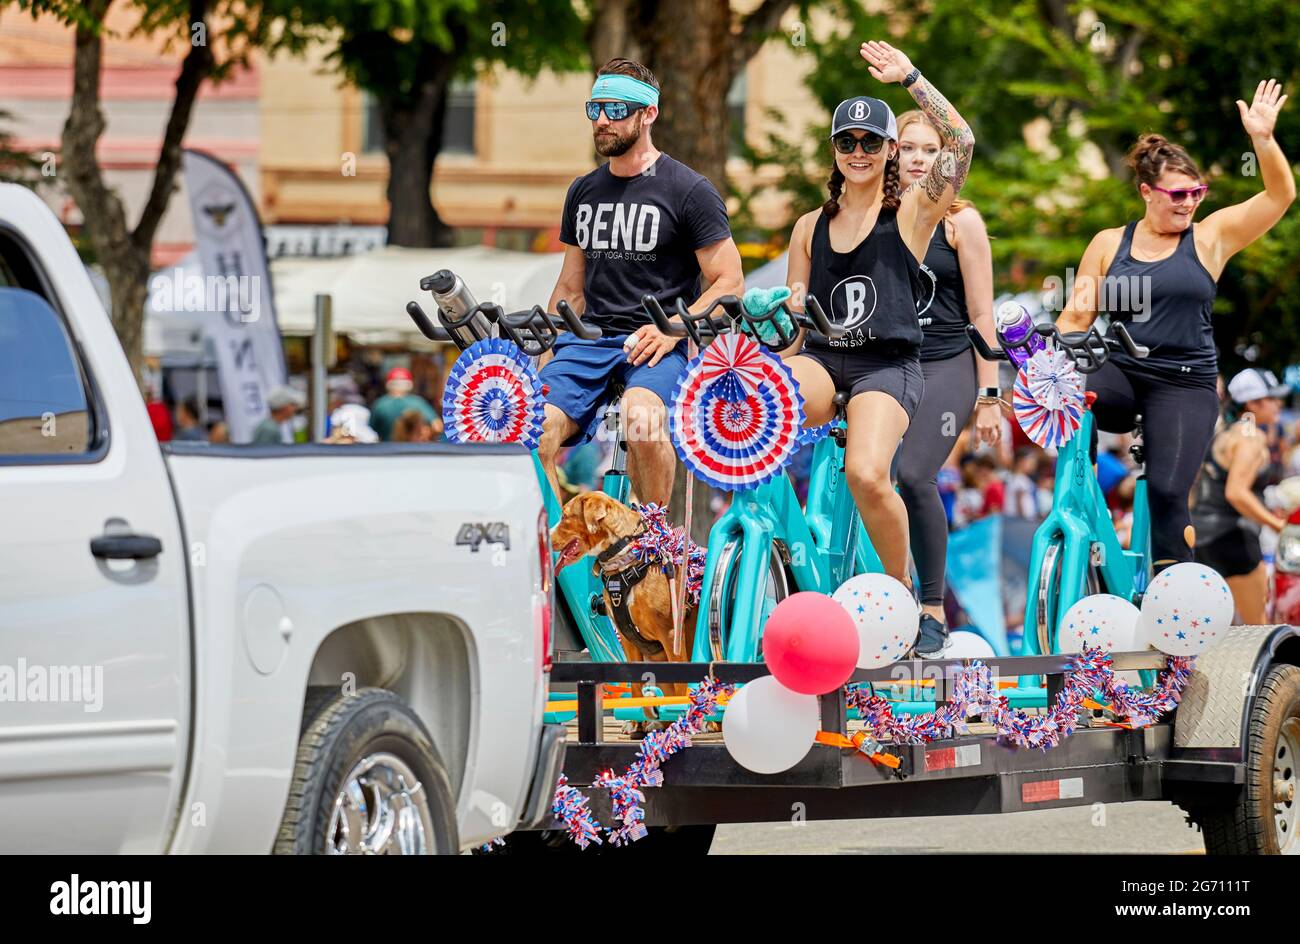 Prescott, Arizona, USA - July 3, 2021: Particpants riding stationary bikes and waving to the spectators in the 4th of July parade Stock Photo